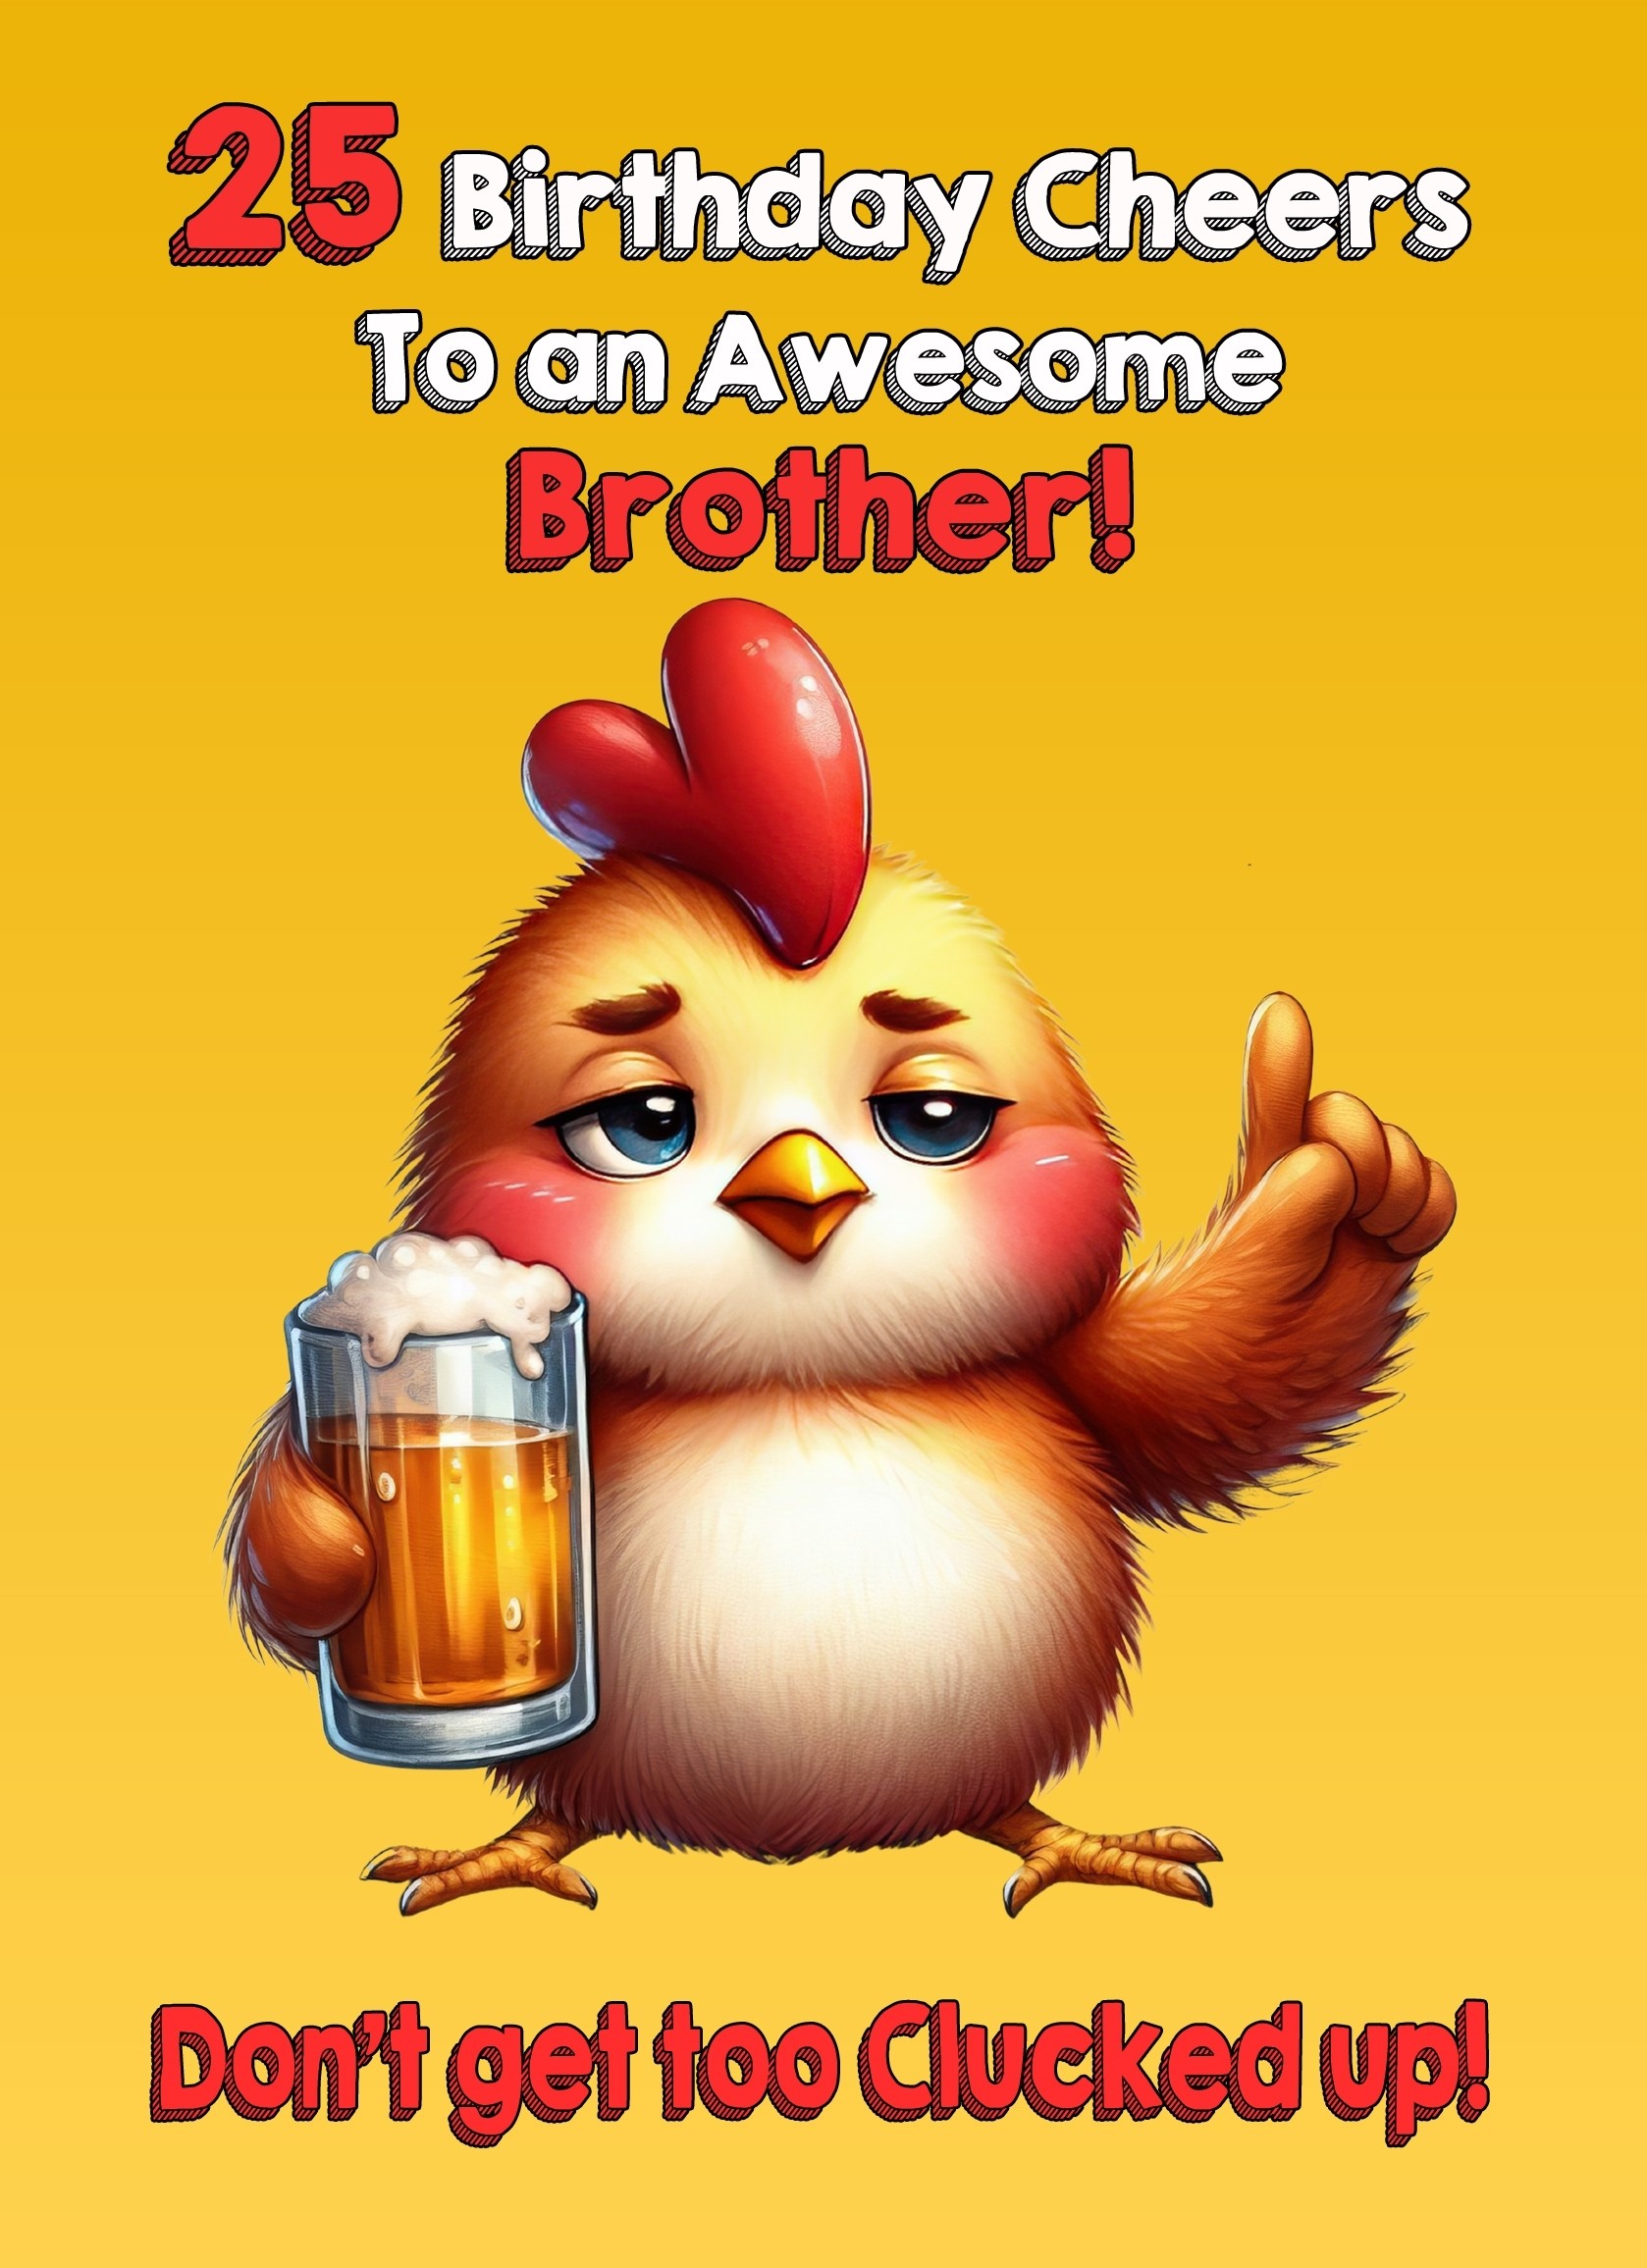 Brother 25th Birthday Card (Funny Beer Chicken Humour)